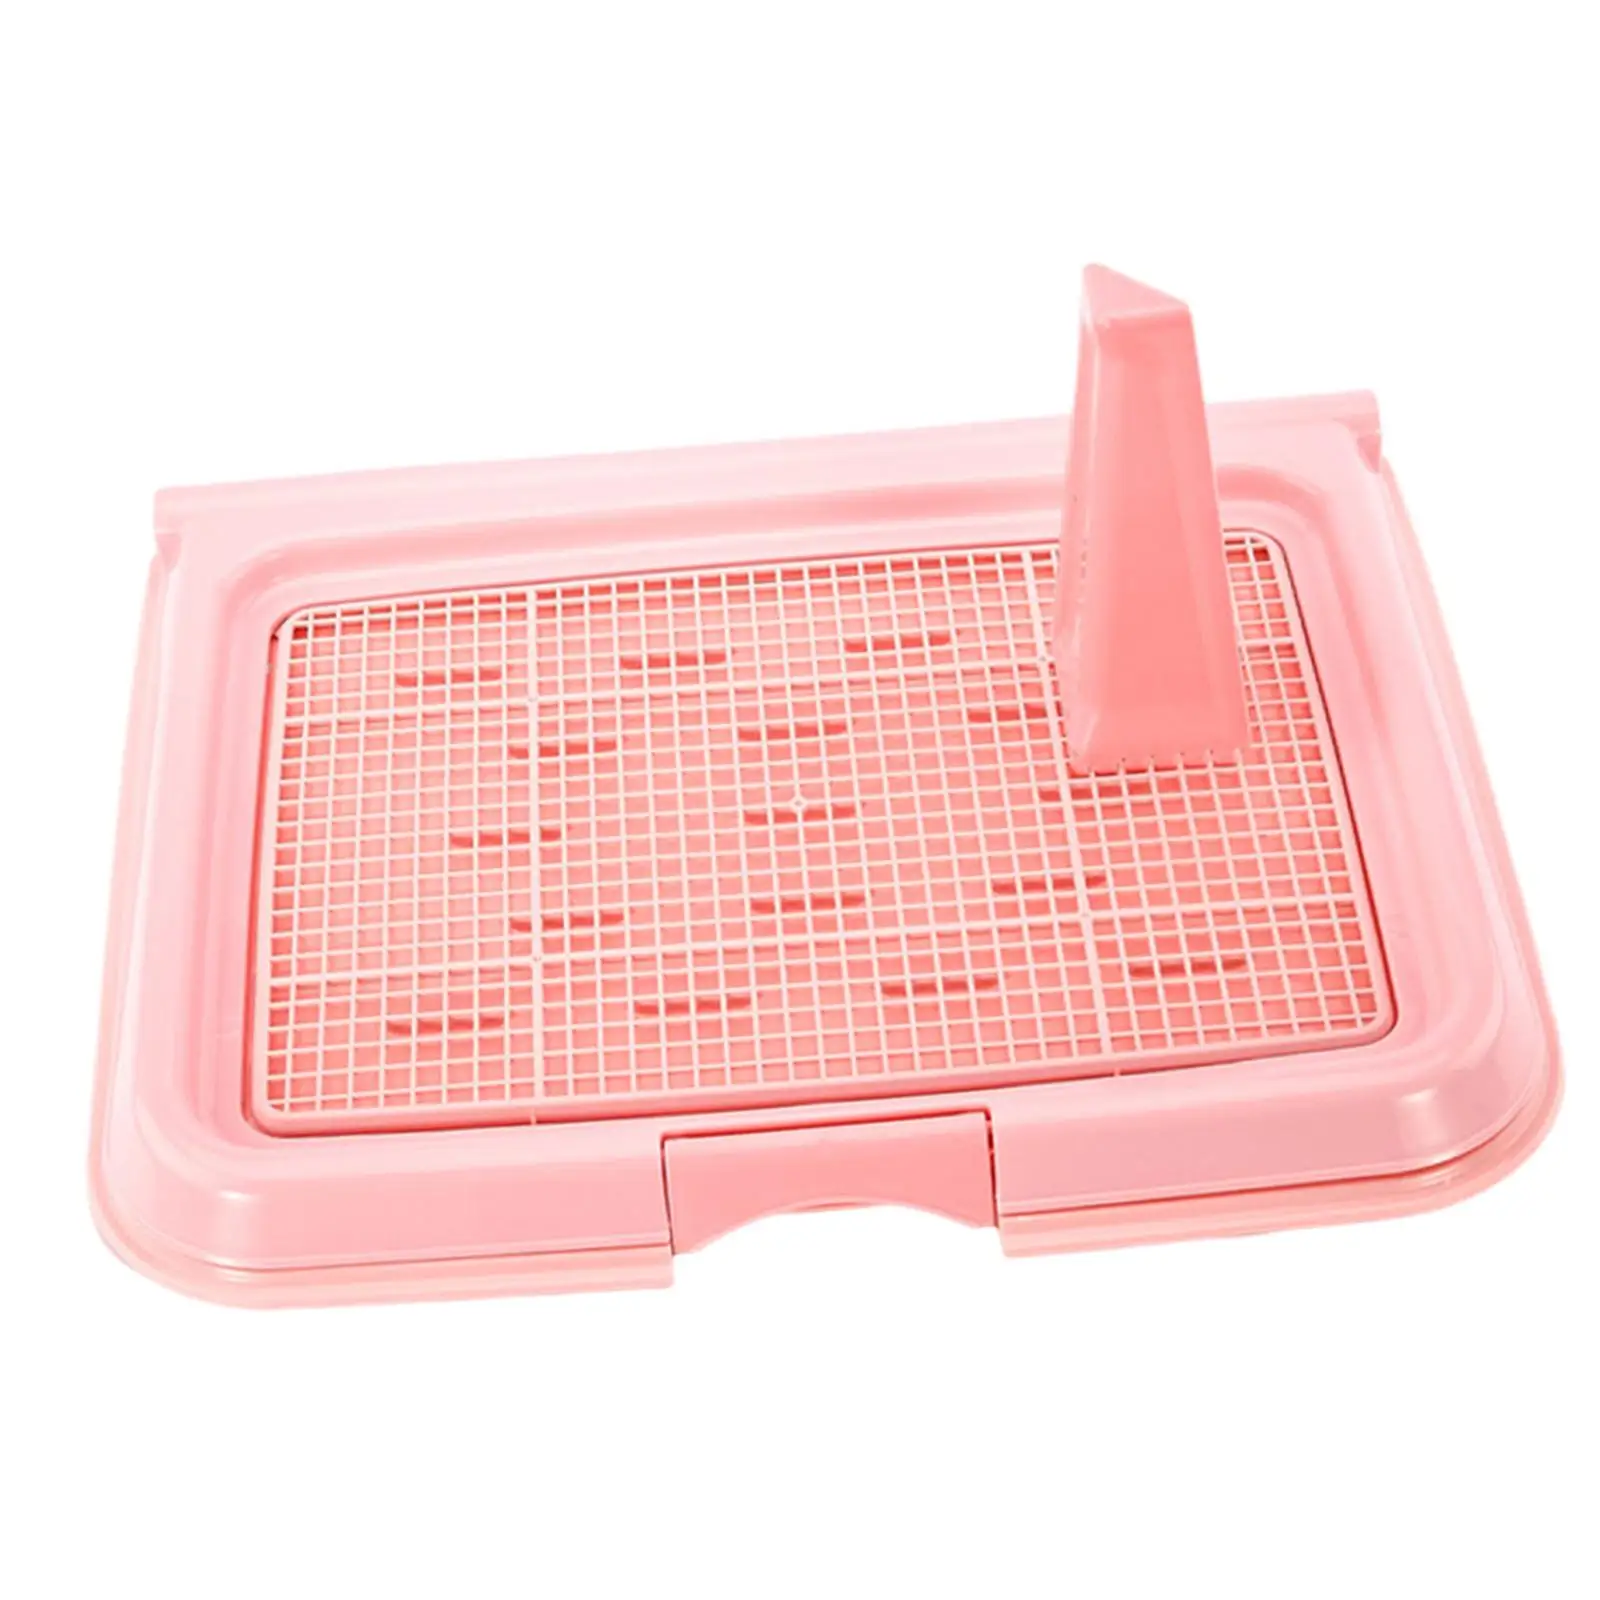 Dog Potty Tray Training Pads Holder Other Pets Pet Supplies Small Animals Dogs Toilet Training Potty Tray Training Pads Toilet